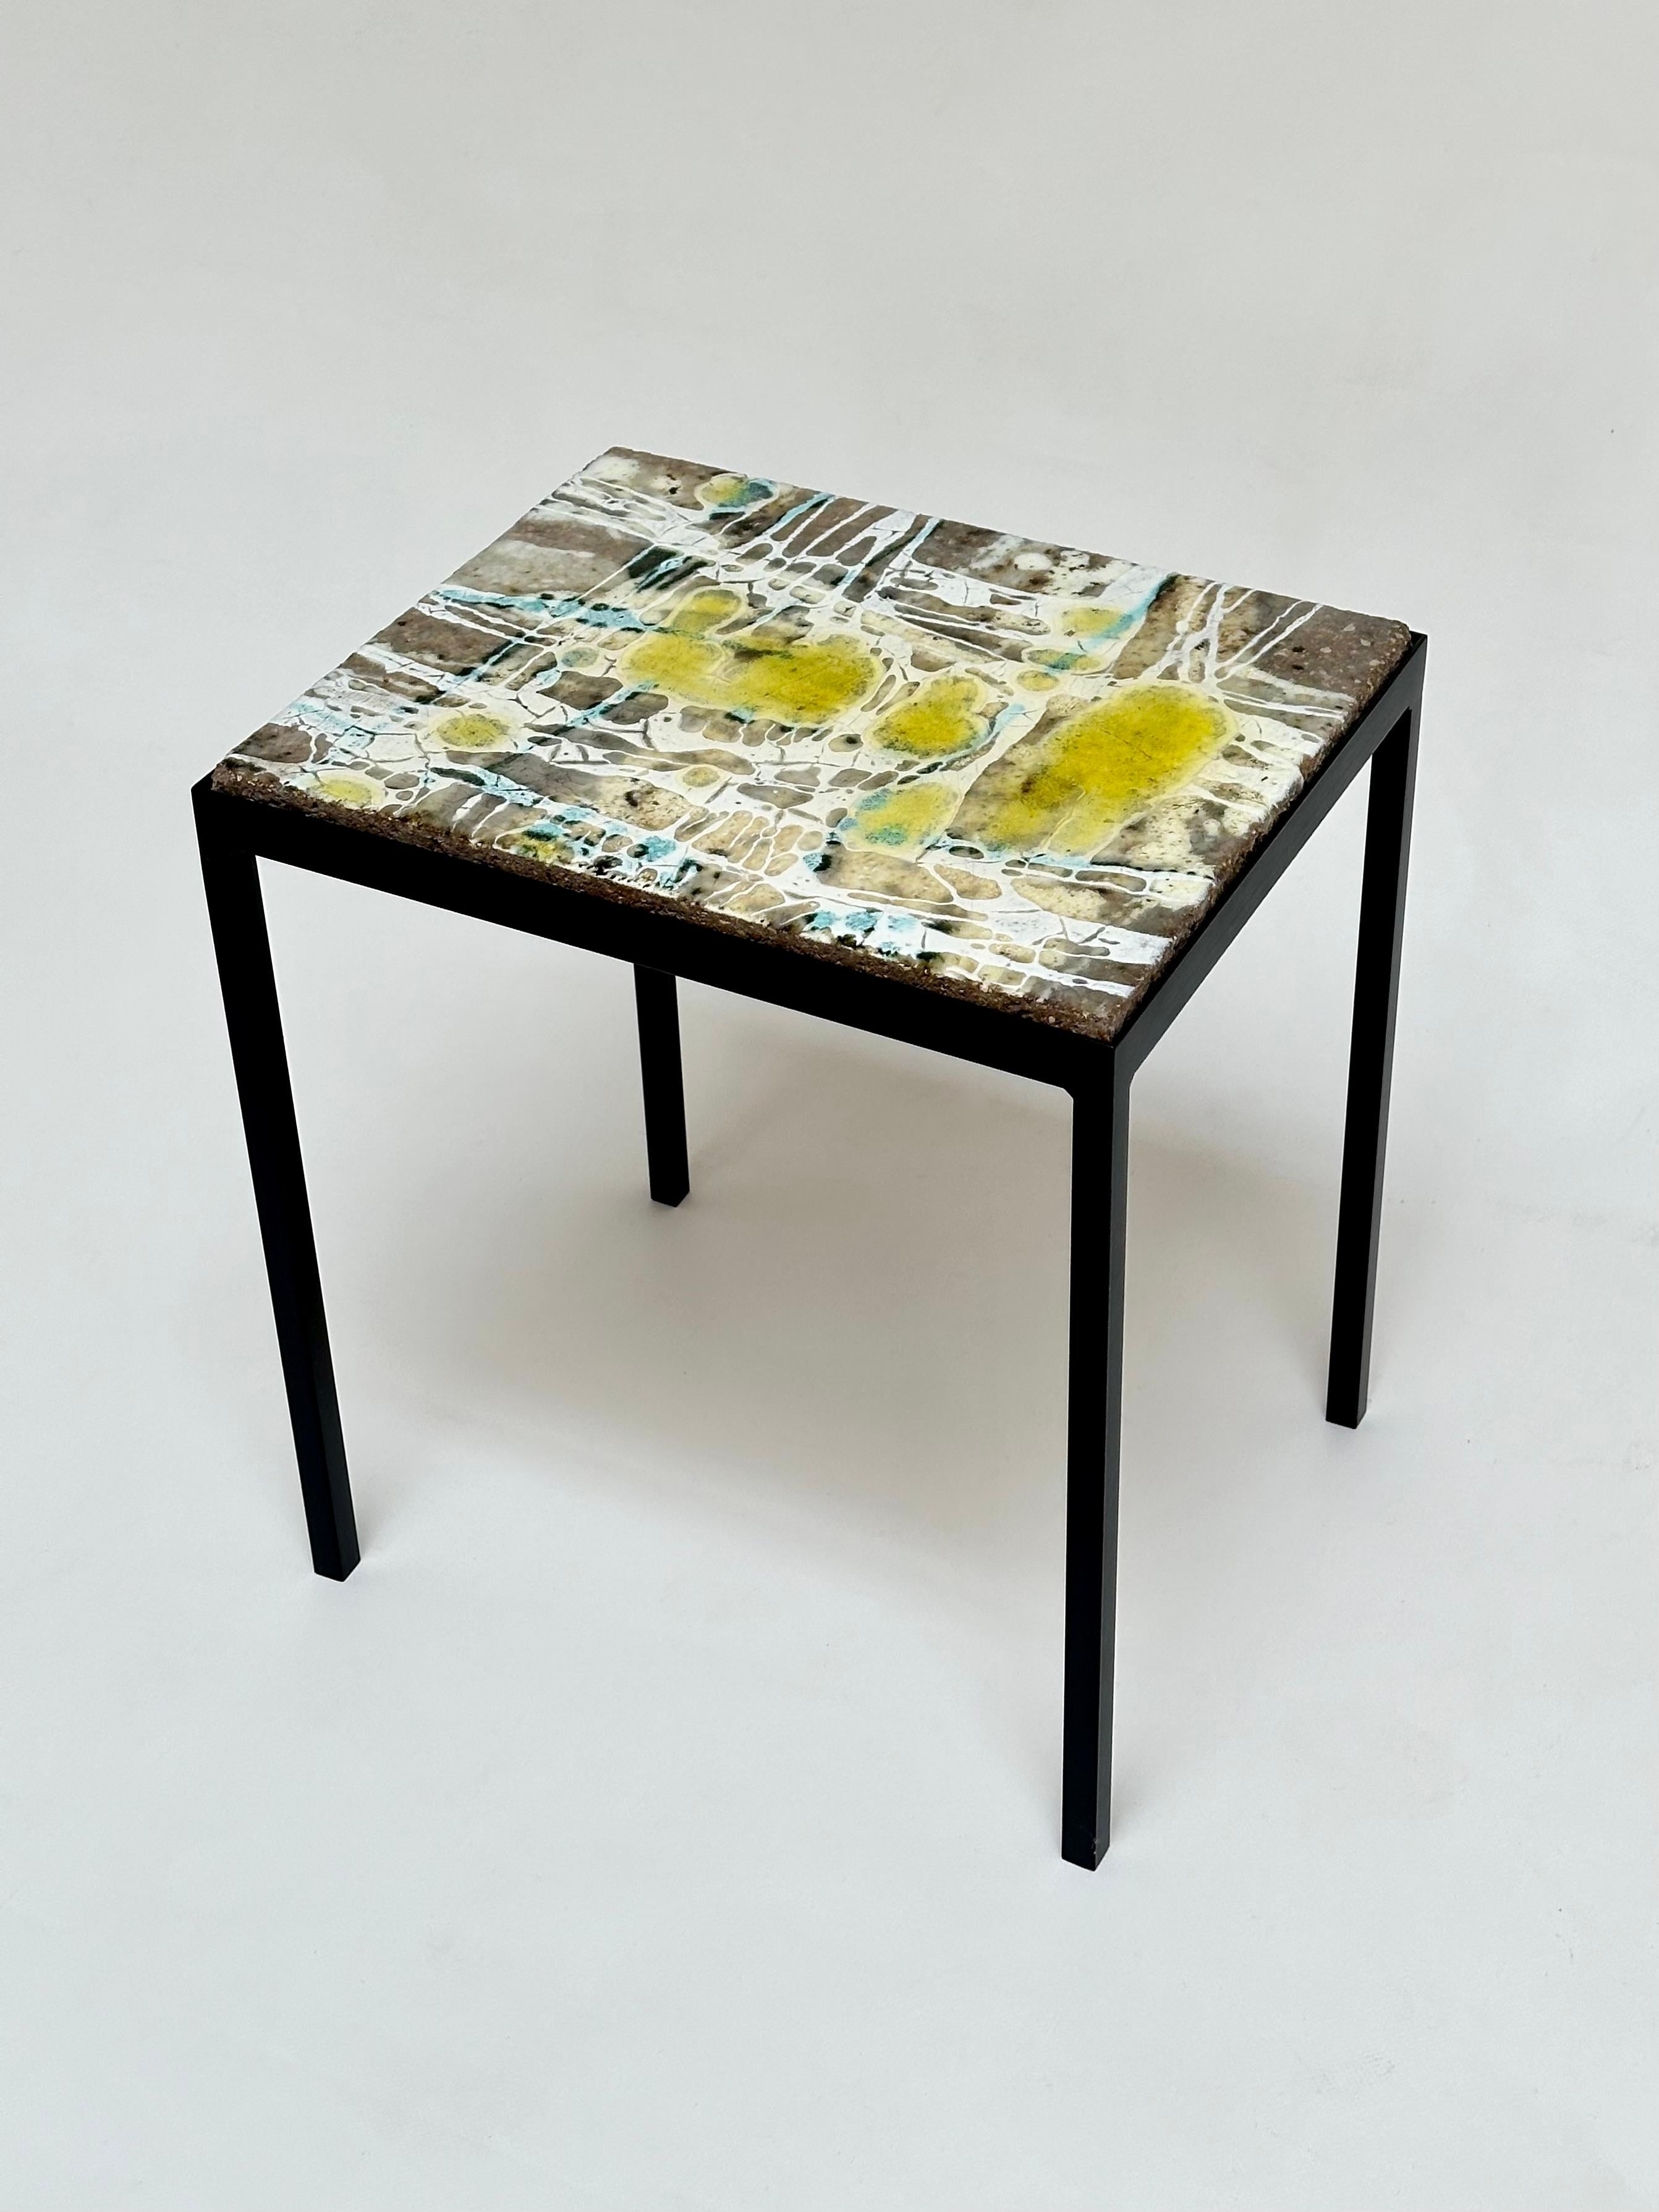 Elegant side table made of a thick slab of glazed concrete with an abstract pattern resting on a lacquered steel base.

 About the Artist 

Jo Amado (b. 1917 - d. 1963) is one of the more prominent ceramists of the Aix en Provence school, marked